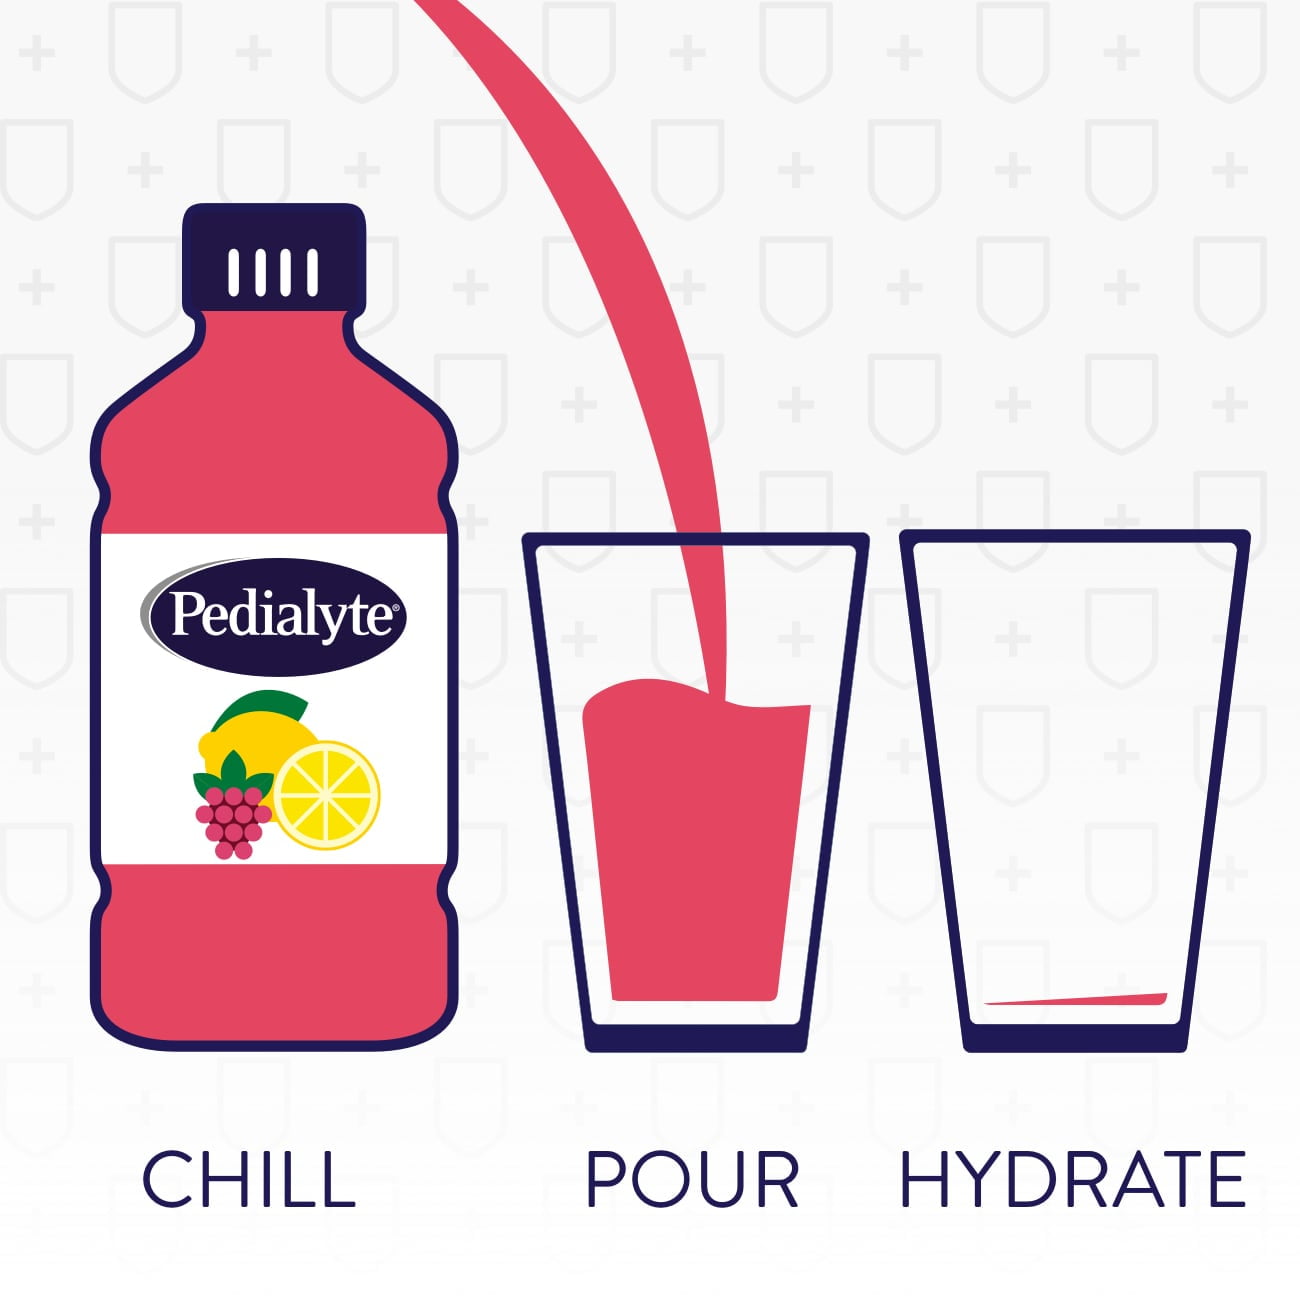 Pedialyte with Immune Support, Raspberry Lemonade, Electrolyte Hydration Drink, 1 Liter